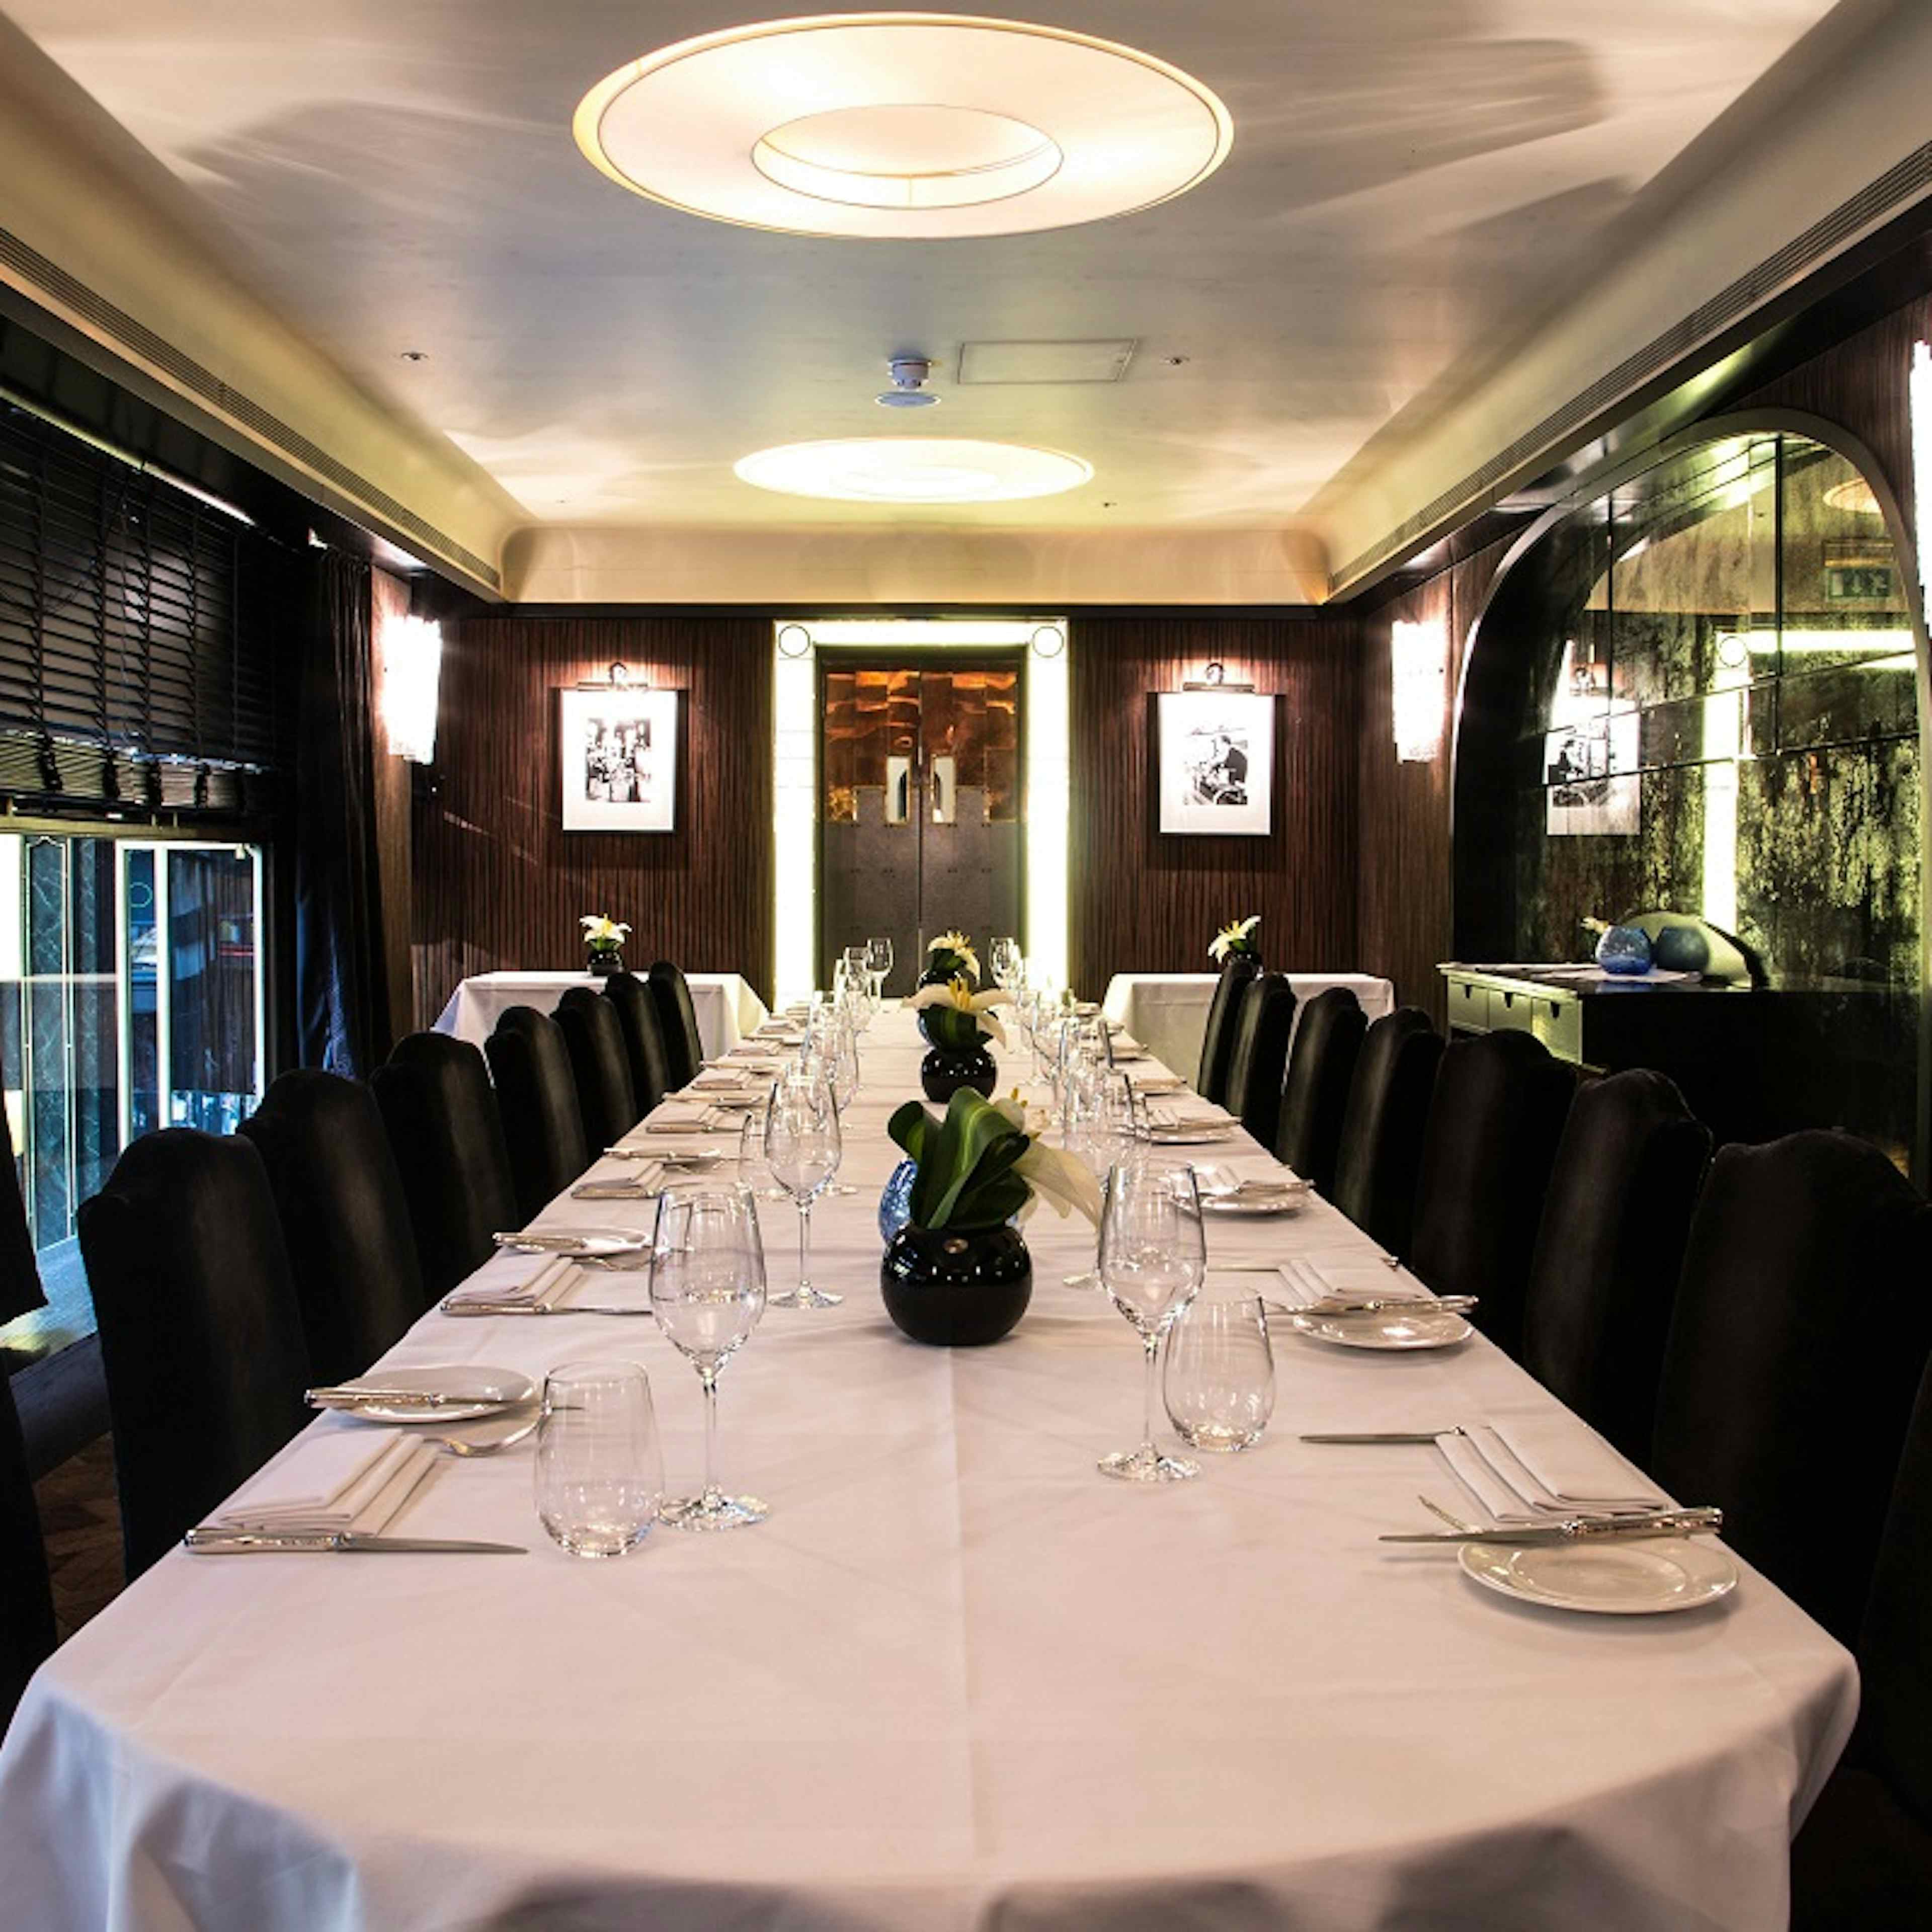 Savoy Grill - D'Oyly Carte Room image 3